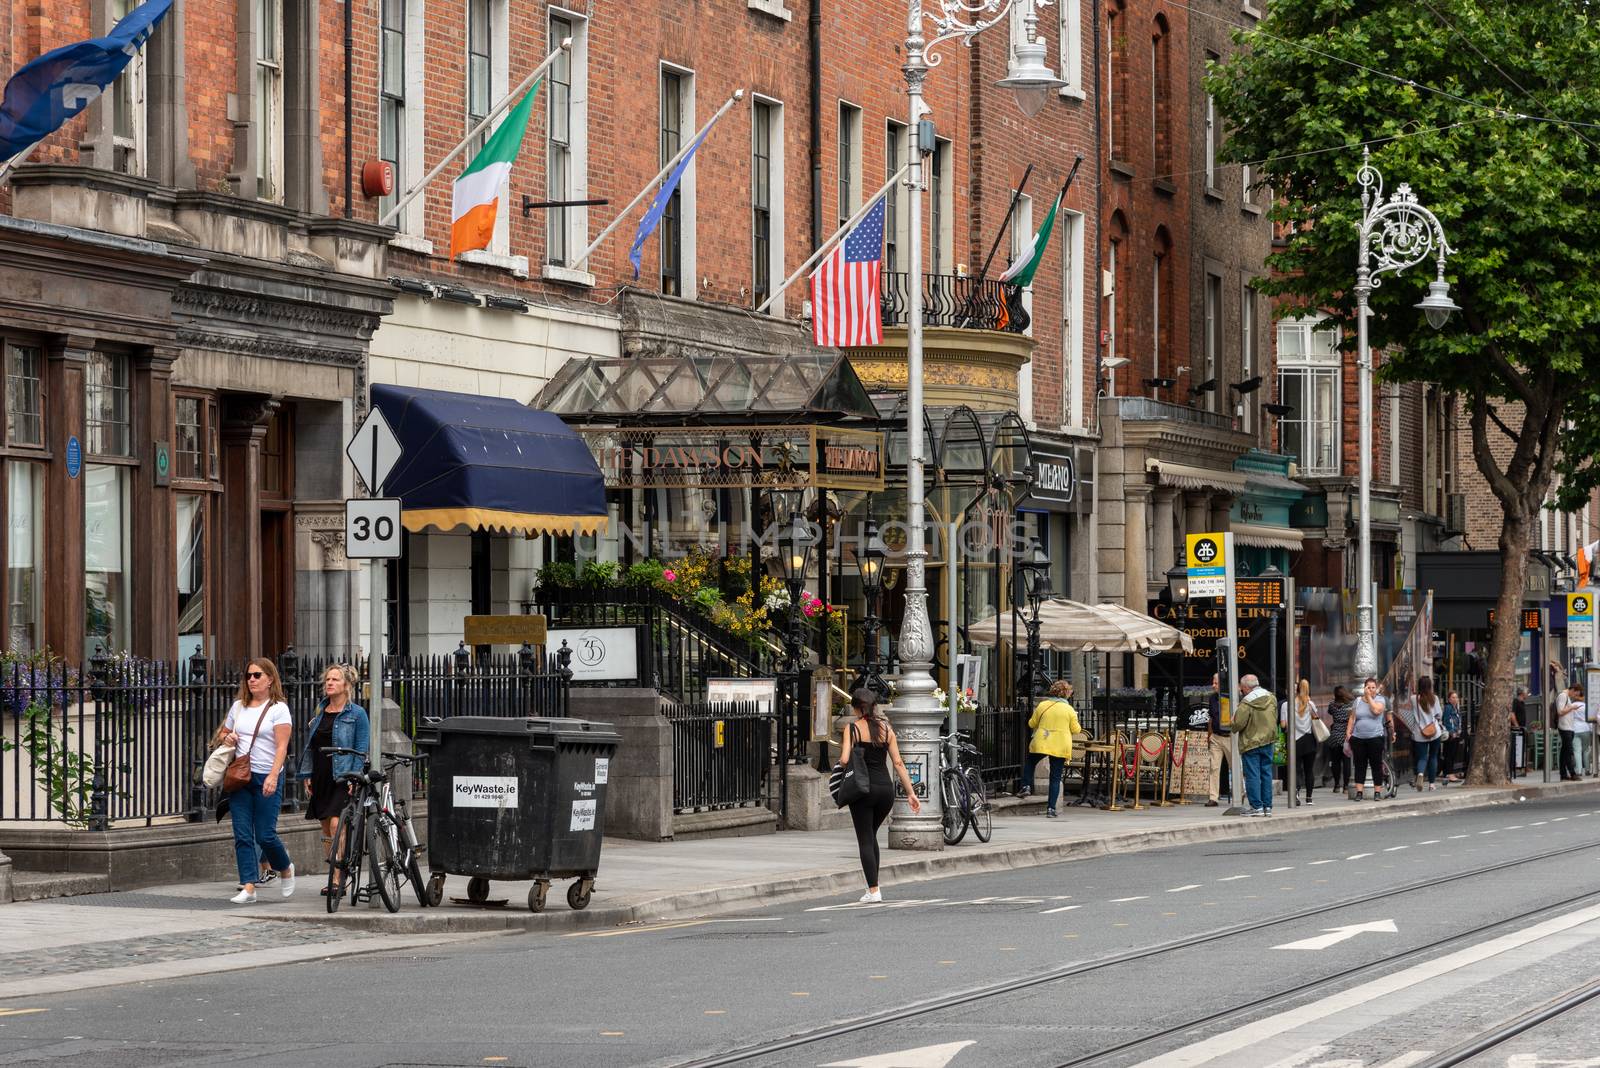 Dublin, Ireland--July 16, 2018. A busy commercial street with hotels, restaurants and shopping.